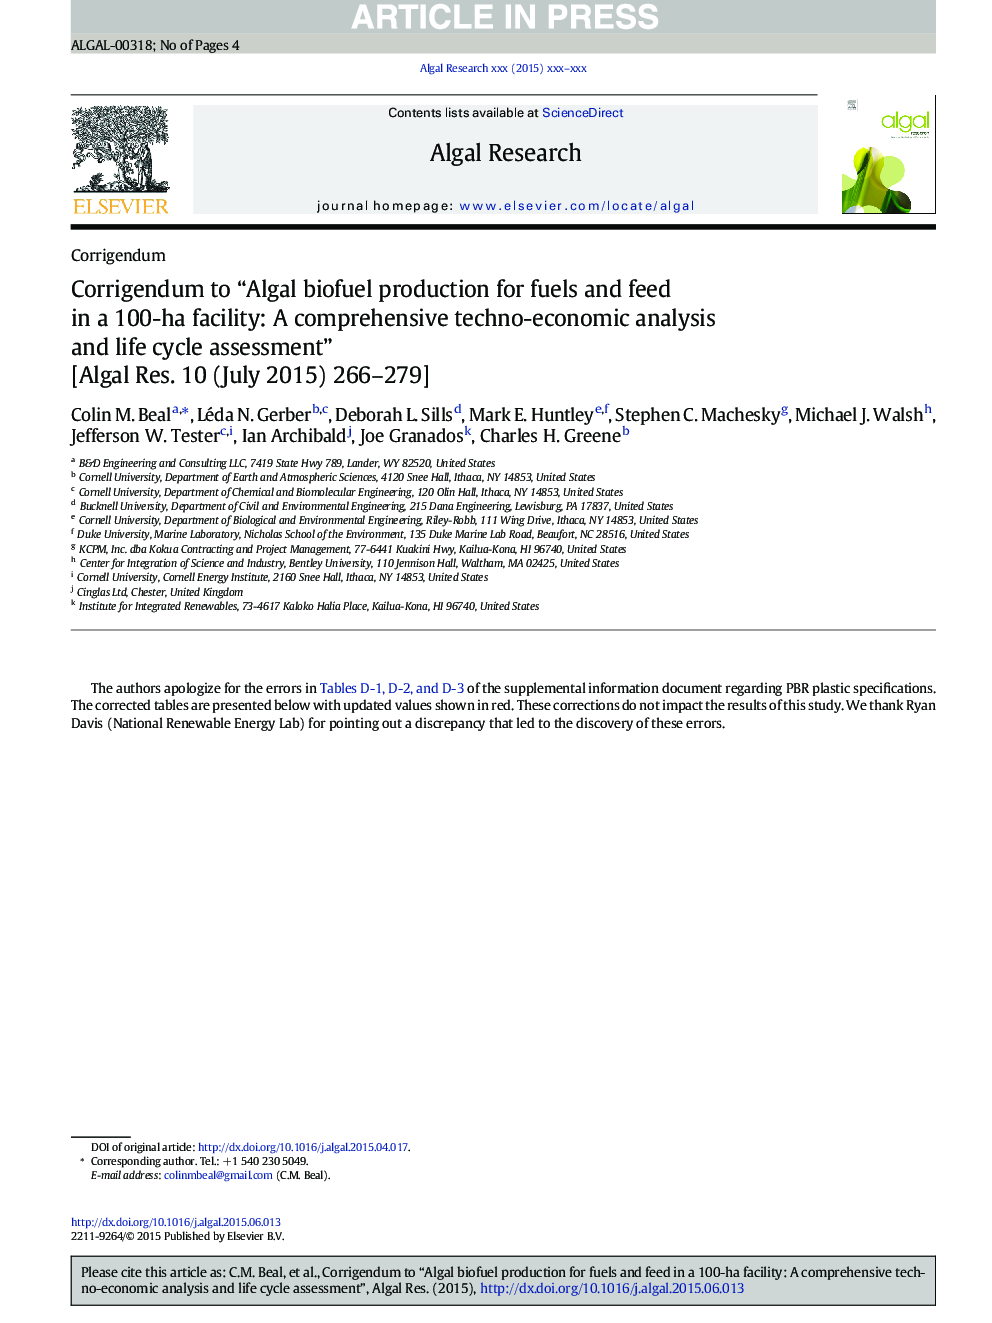 Corrigendum to “Algal biofuel production for fuels and feed in a 100-ha facility: A comprehensive techno-economic analysis and life cycle assessment” [Algal Res. 10 (July 2015) 266-279]